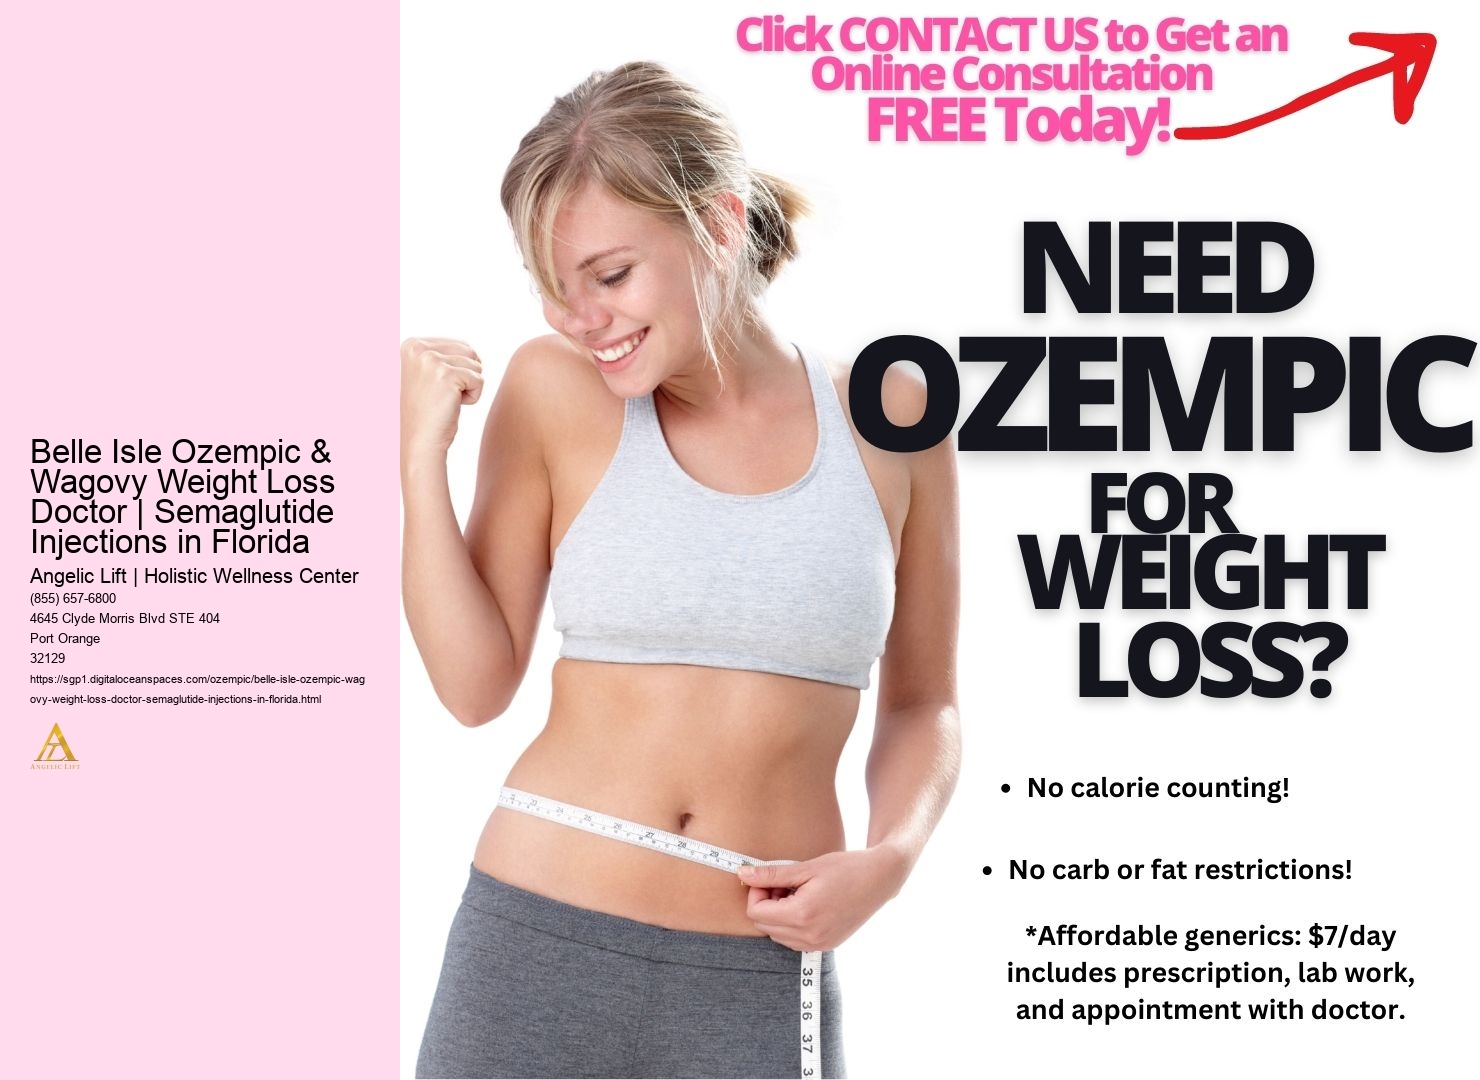 Belle Isle Ozempic & Wagovy Weight Loss Doctor | Semaglutide Injections in Florida